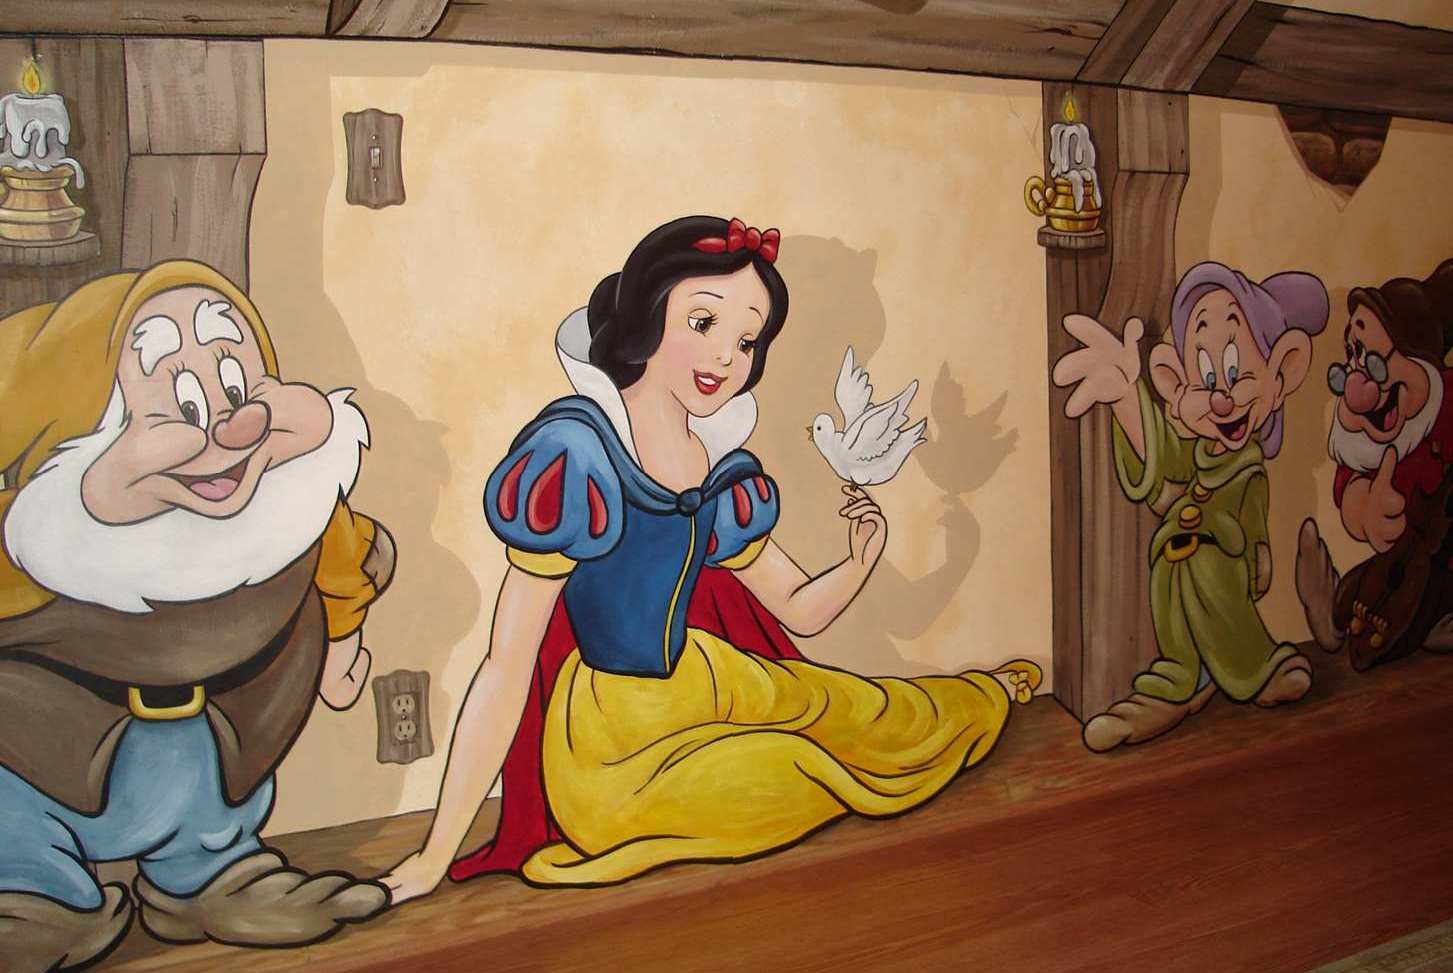 Snow-White-and-the-Seven-Dwarfs-Cottage-Mural-1-sized.jpg